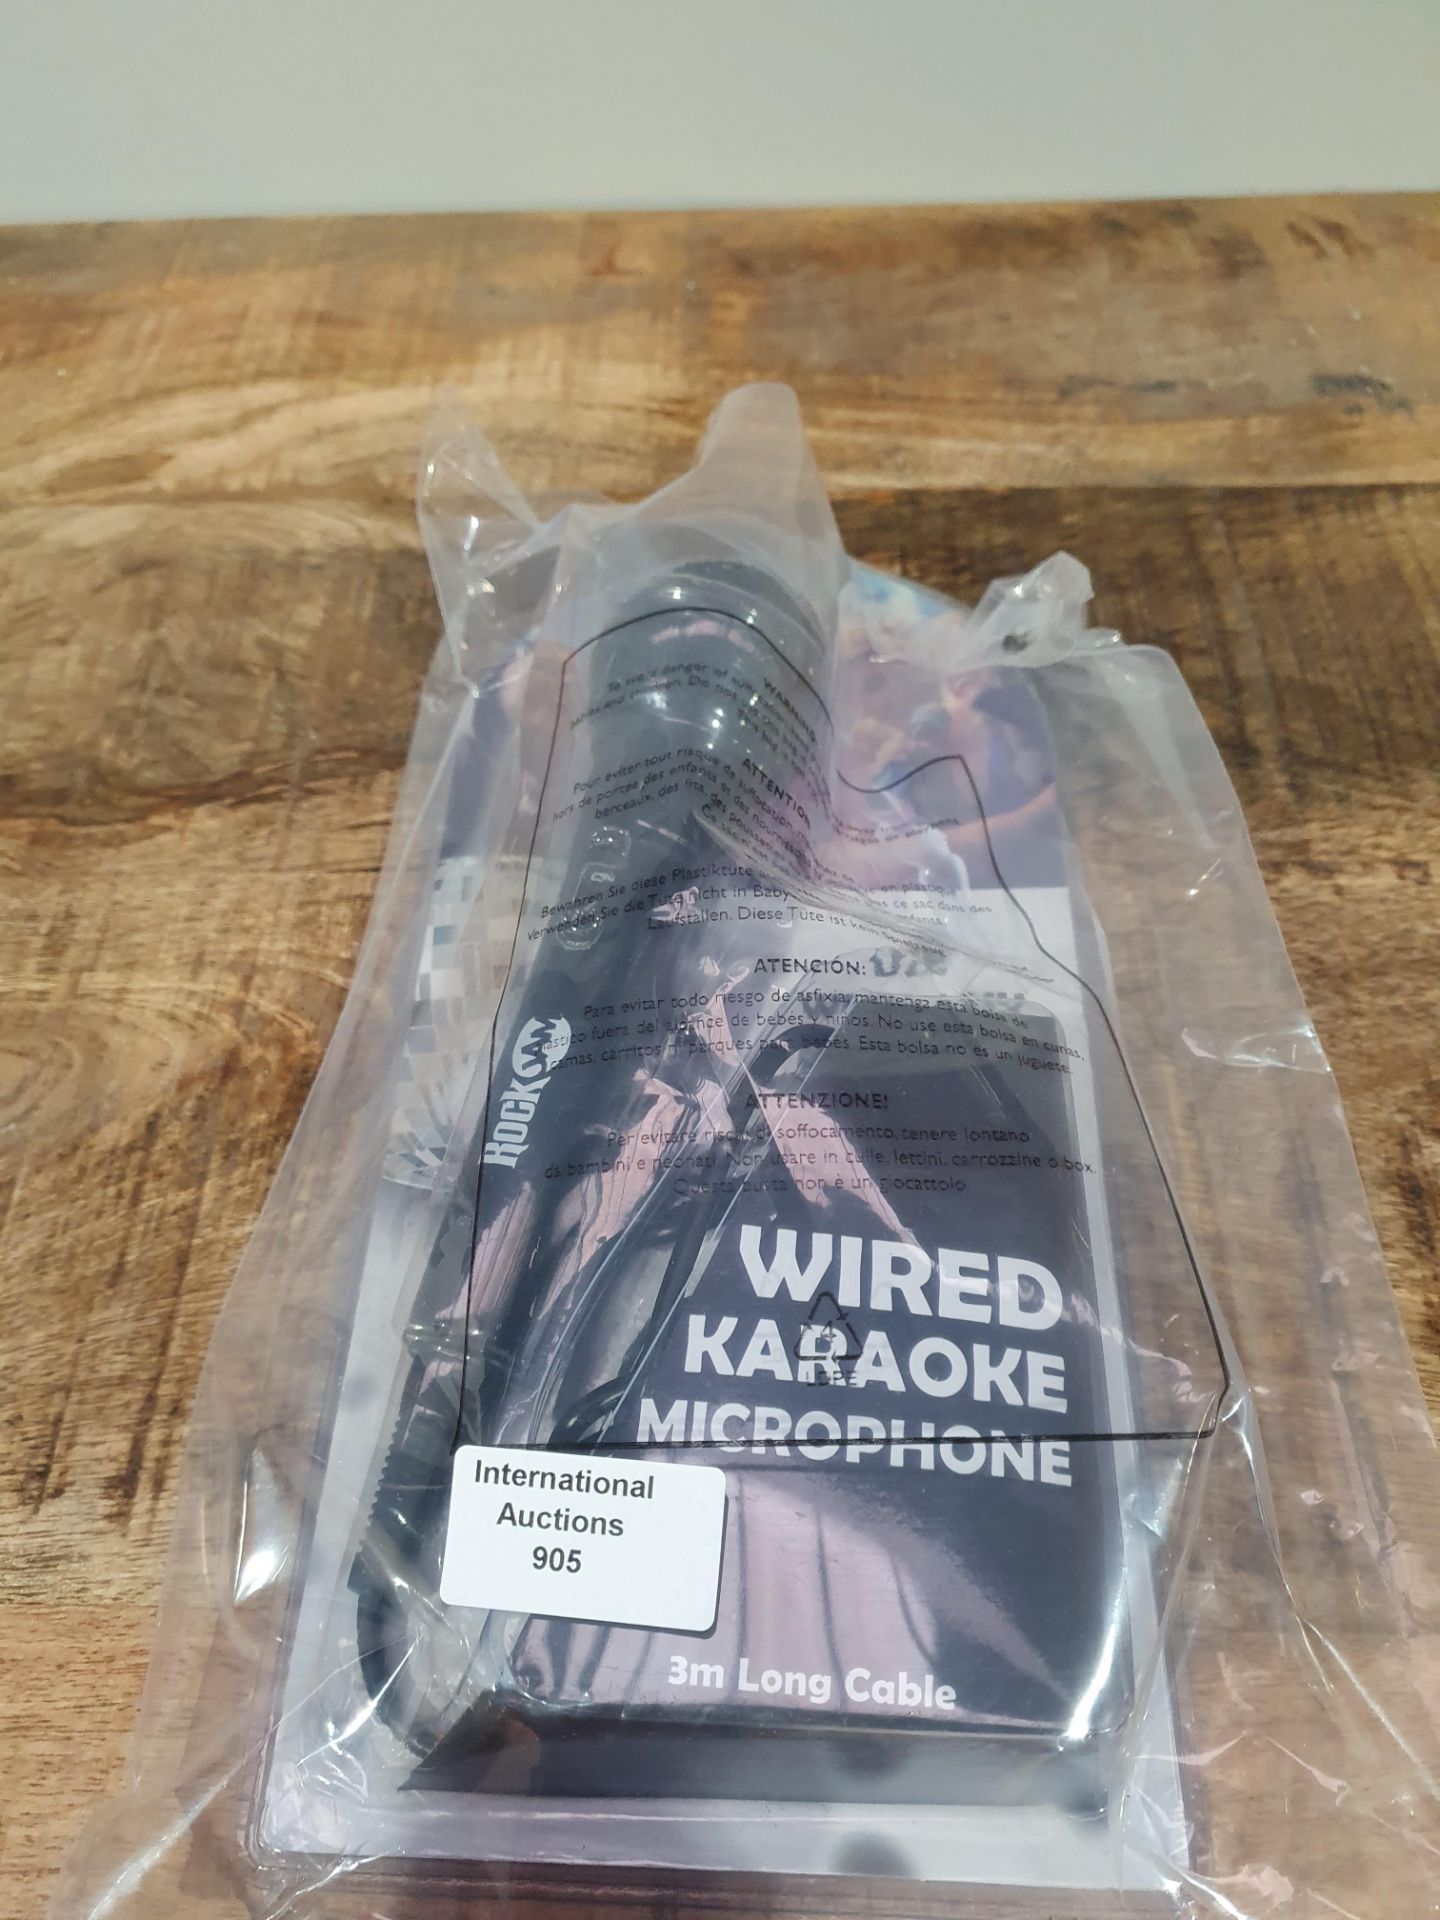 WIRED KARAOKE MICROPHONECondition ReportAppraisal Available on Request - All Items are Unchecked/